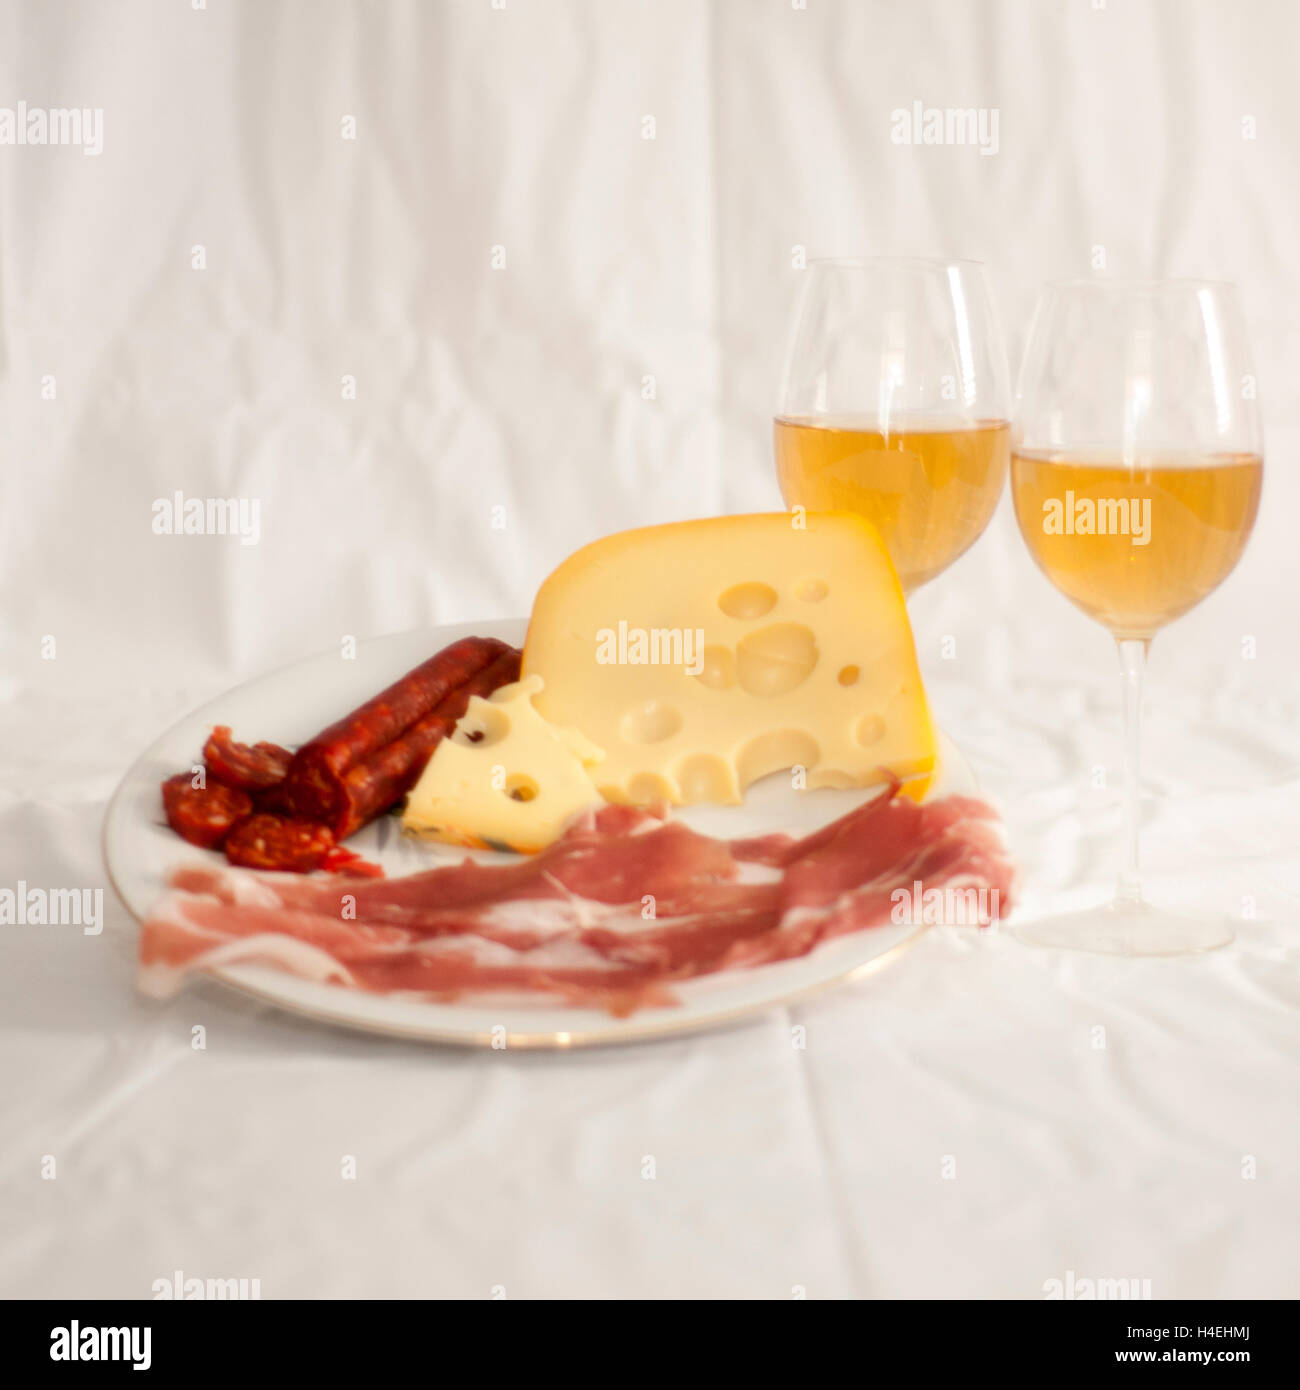 Plate of meats and cheese appetizer with two stemmed wine glasses with white wine on white cloth Stock Photo